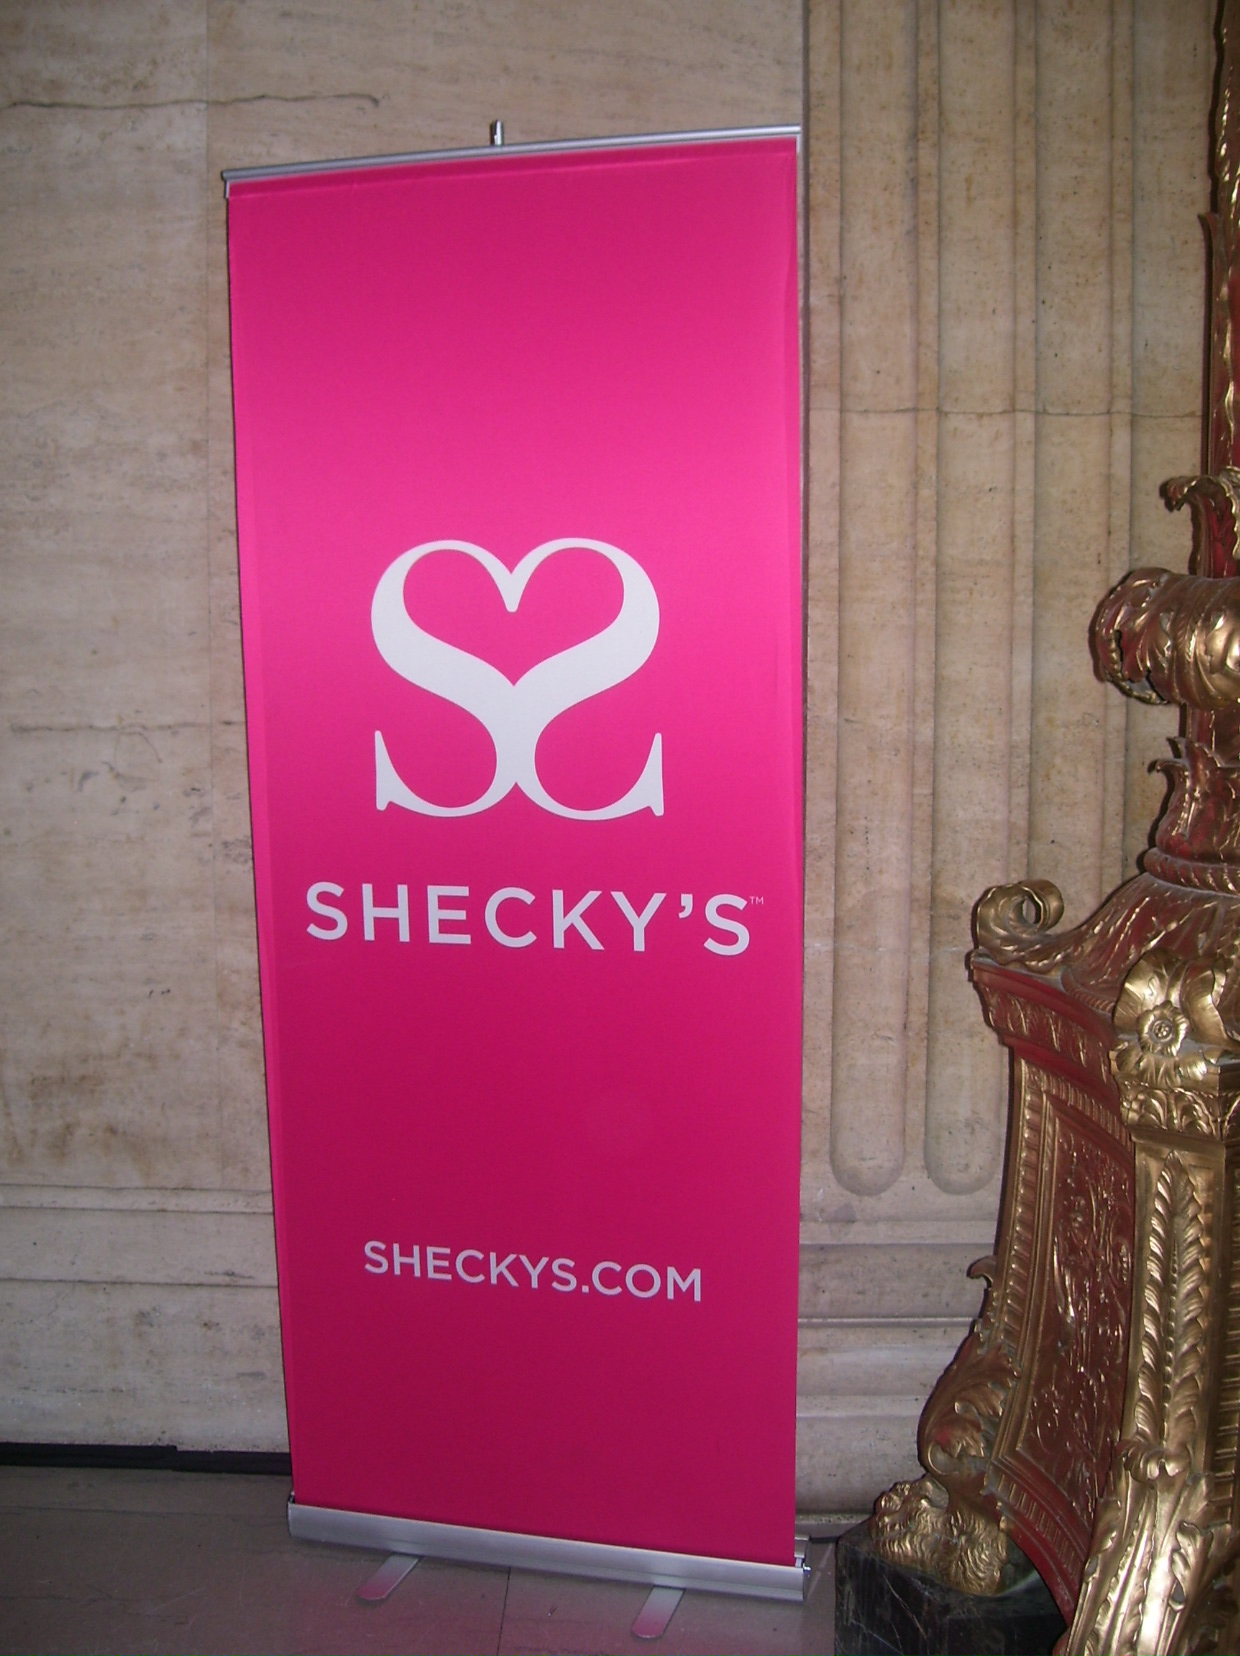 Event: Shecky’s Girls Night Out – Spring 2012